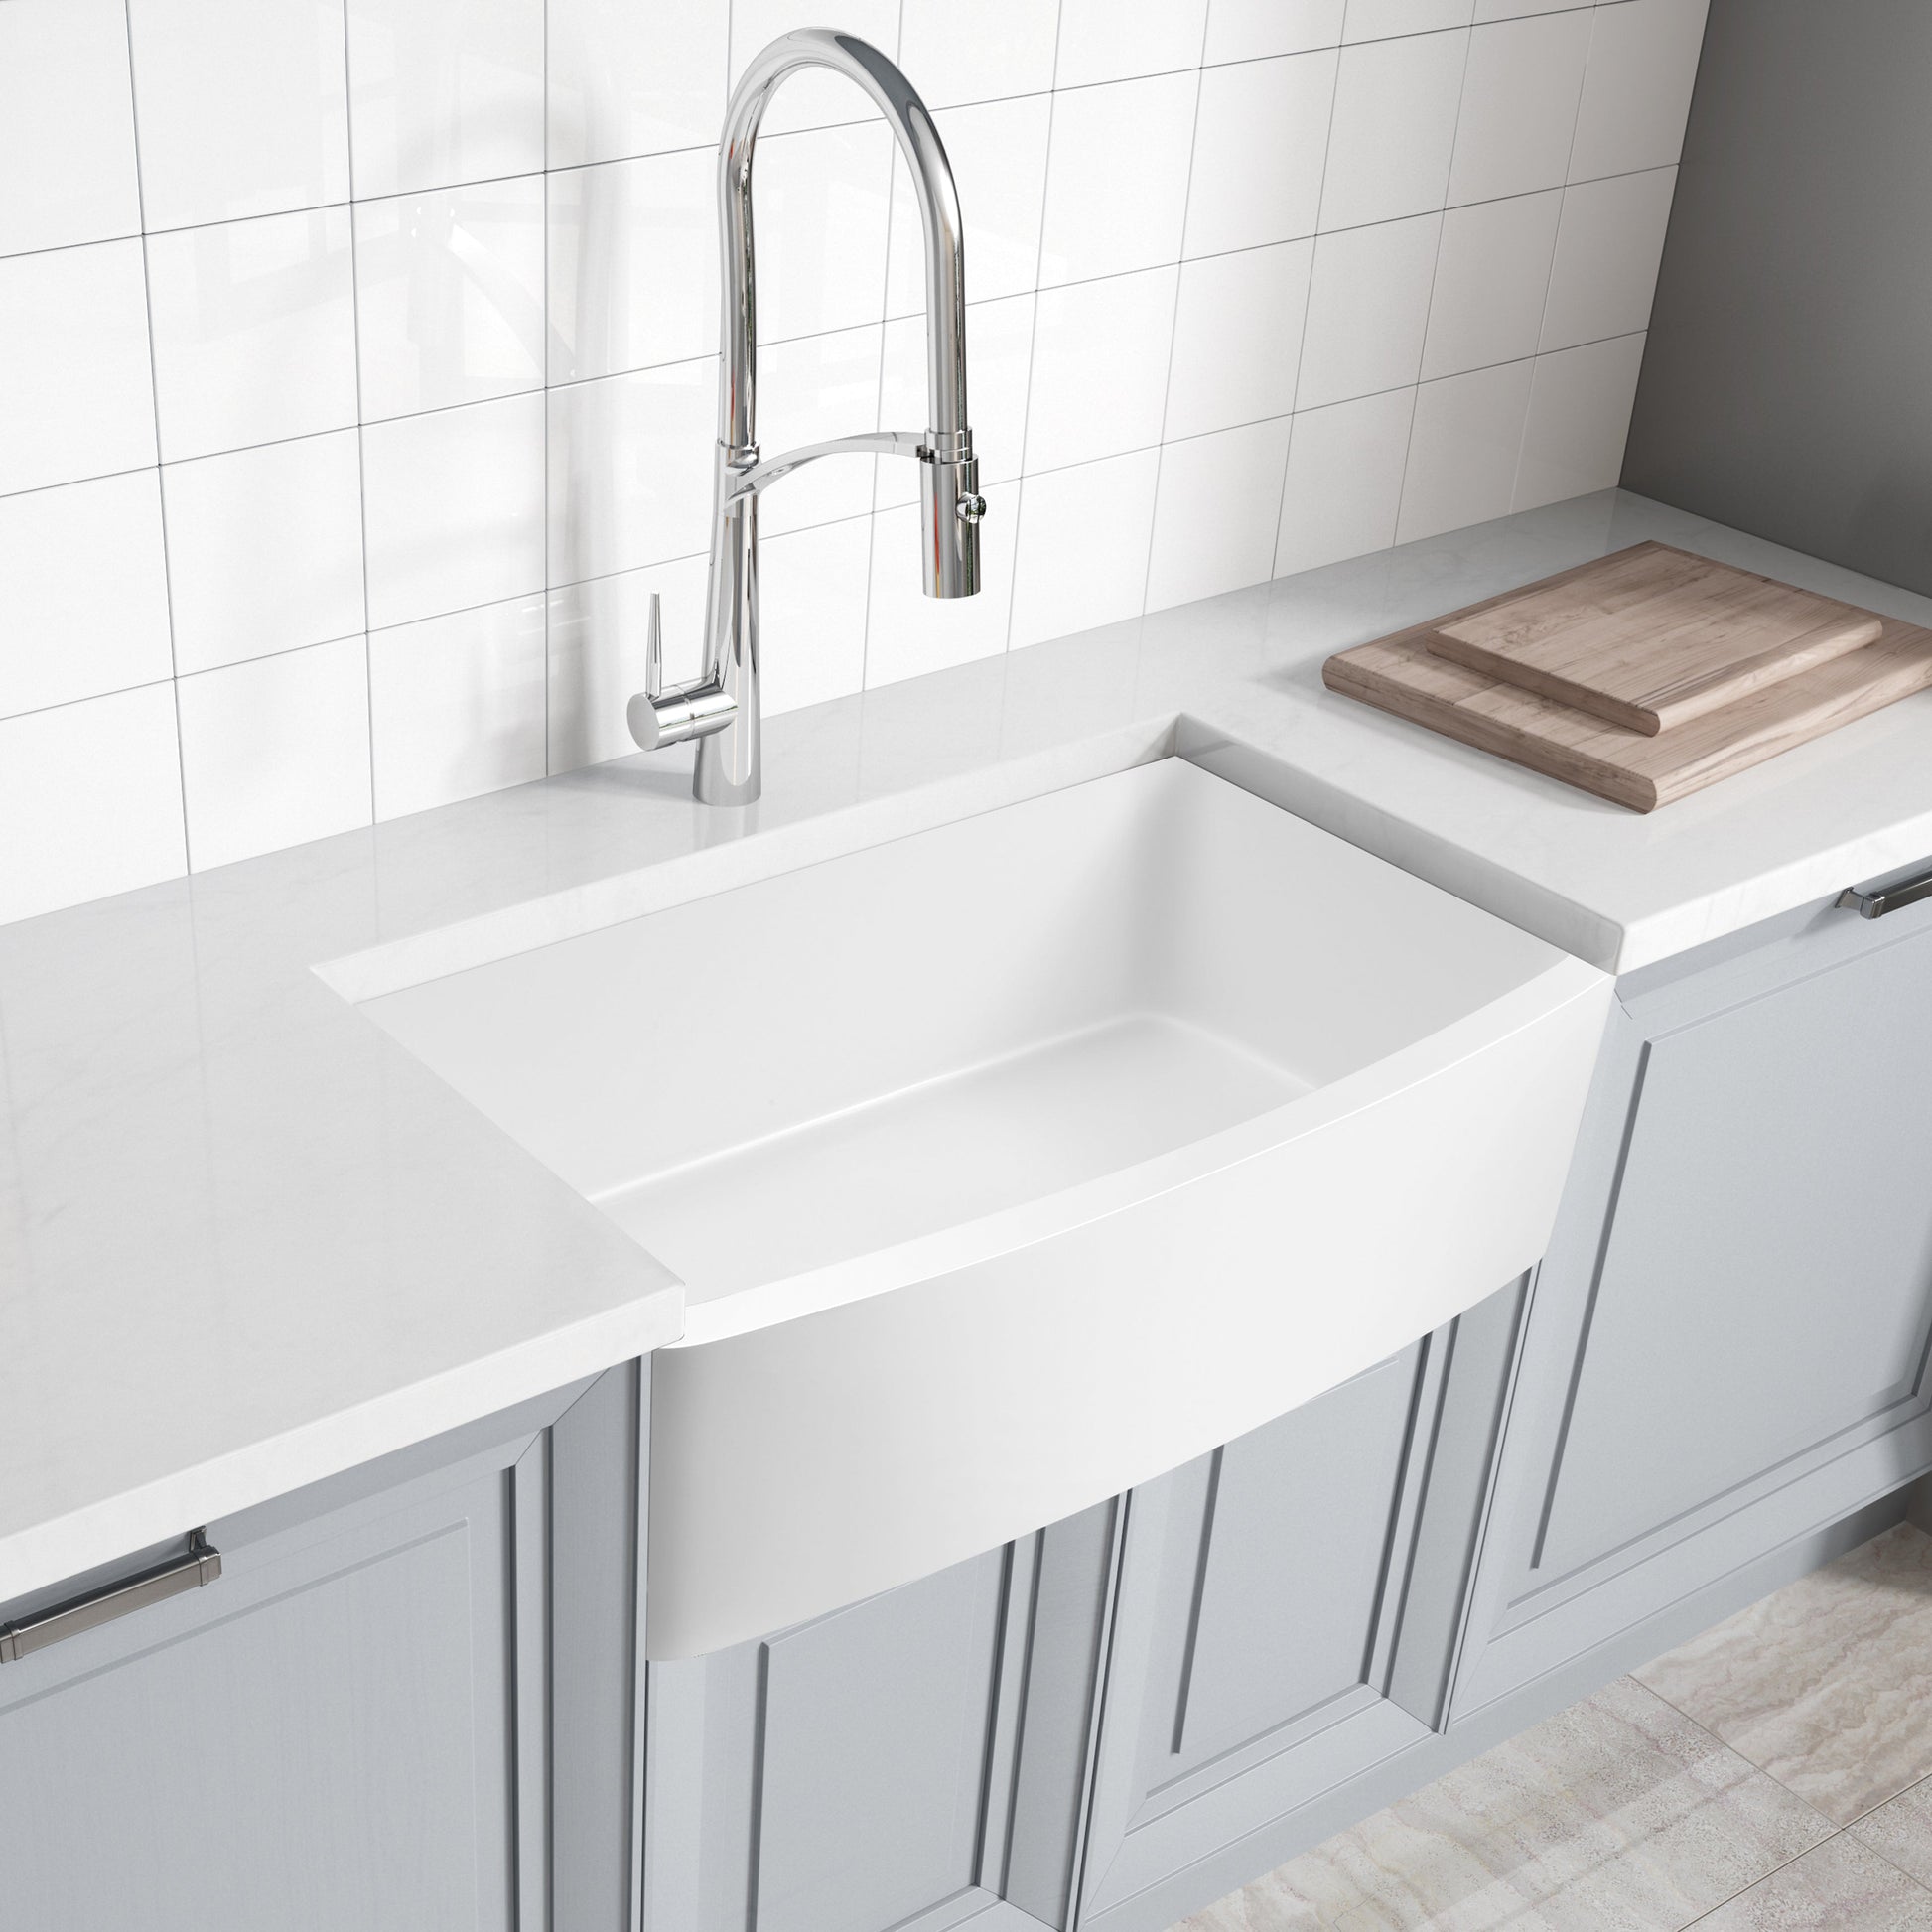 ANZZI Prisma Series 36" Single Basin Matte White Solid Surface Farmhouse Kitchen Sink With Chrome Strainer and Drain Assembly